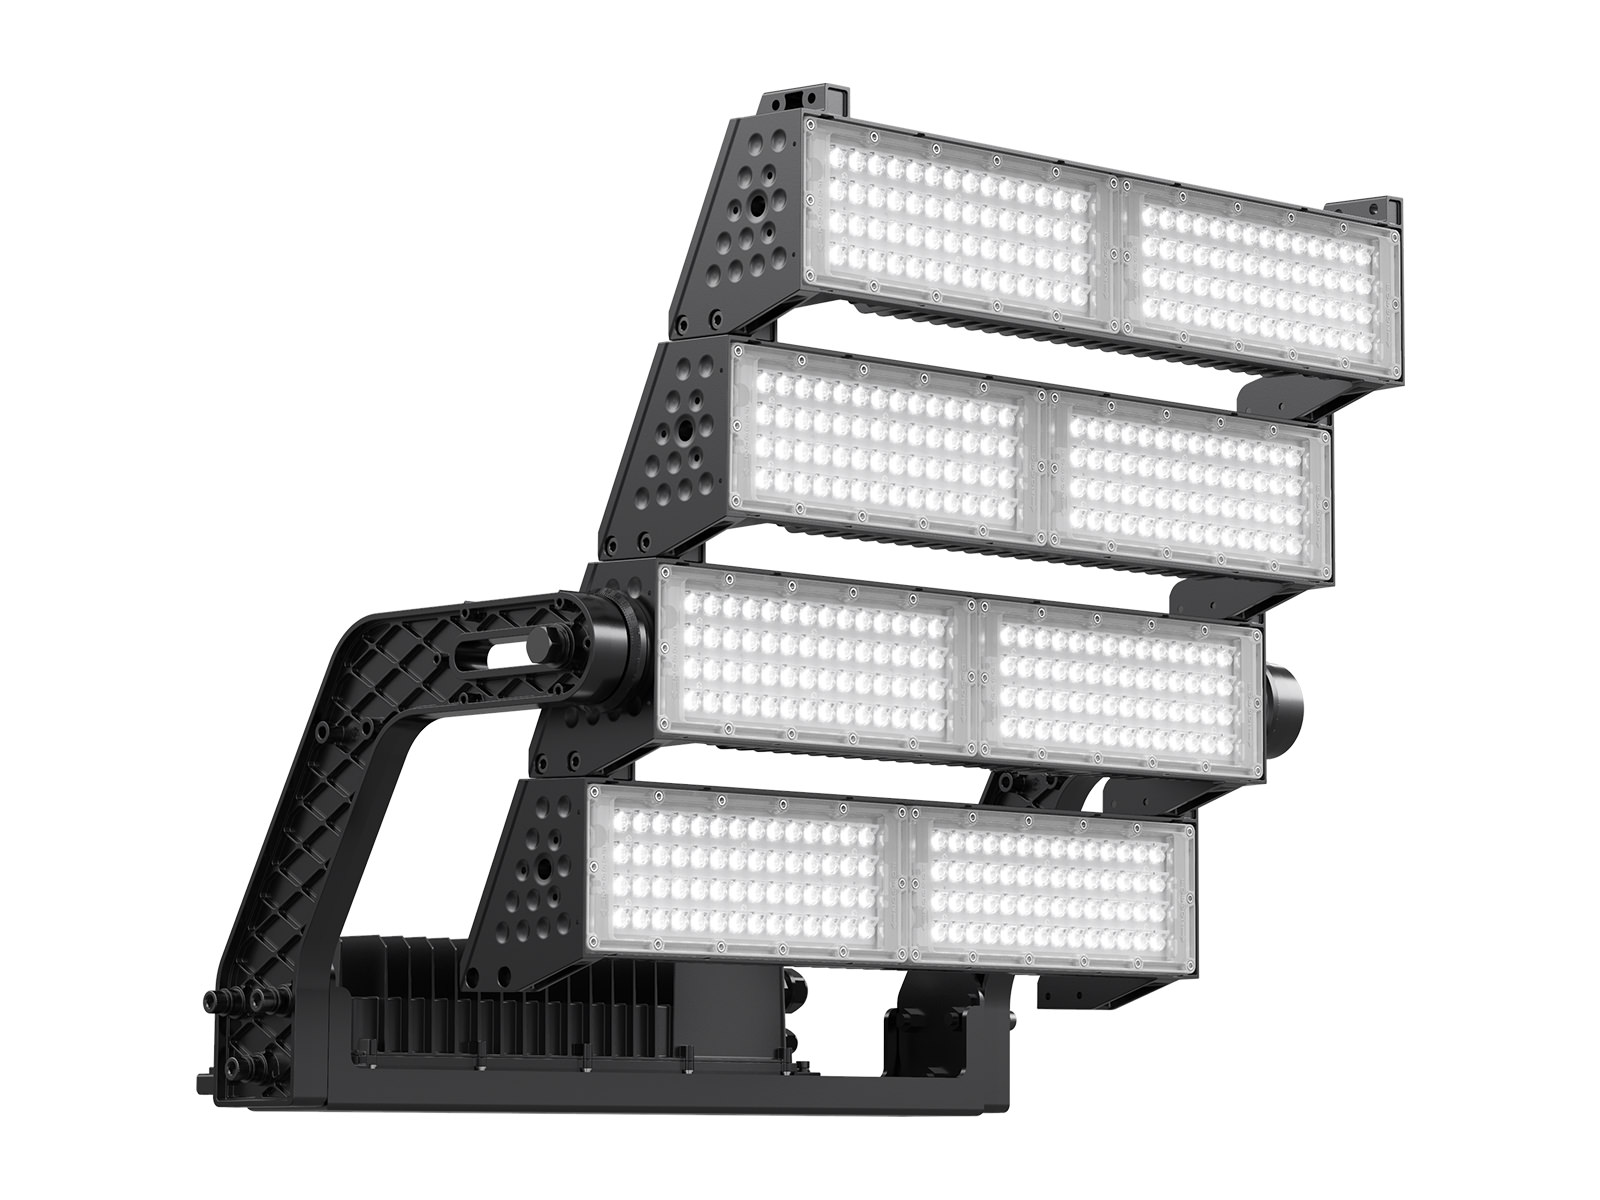 SP01 Easy Maintenance LED Modular Sports Lights for Outdoor High Mast Lighting and HDTV Broadcasting Applications